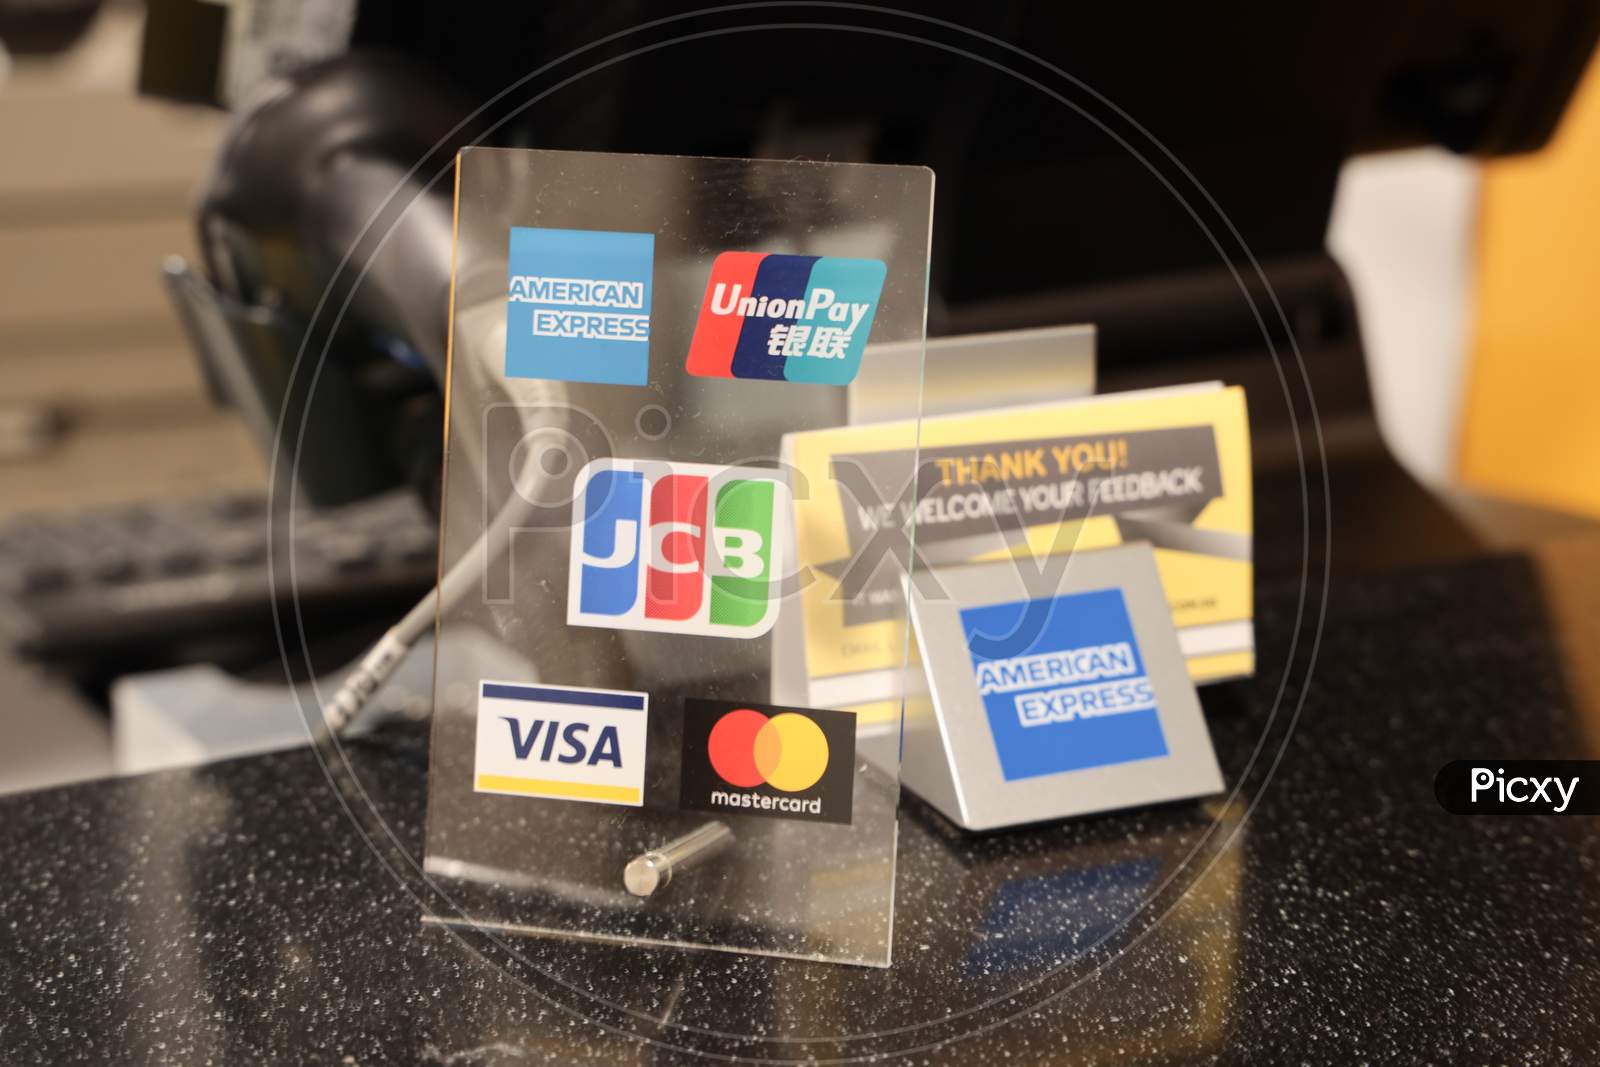 VISA American Express, UnionPay Payment Options At a POS In Singapore